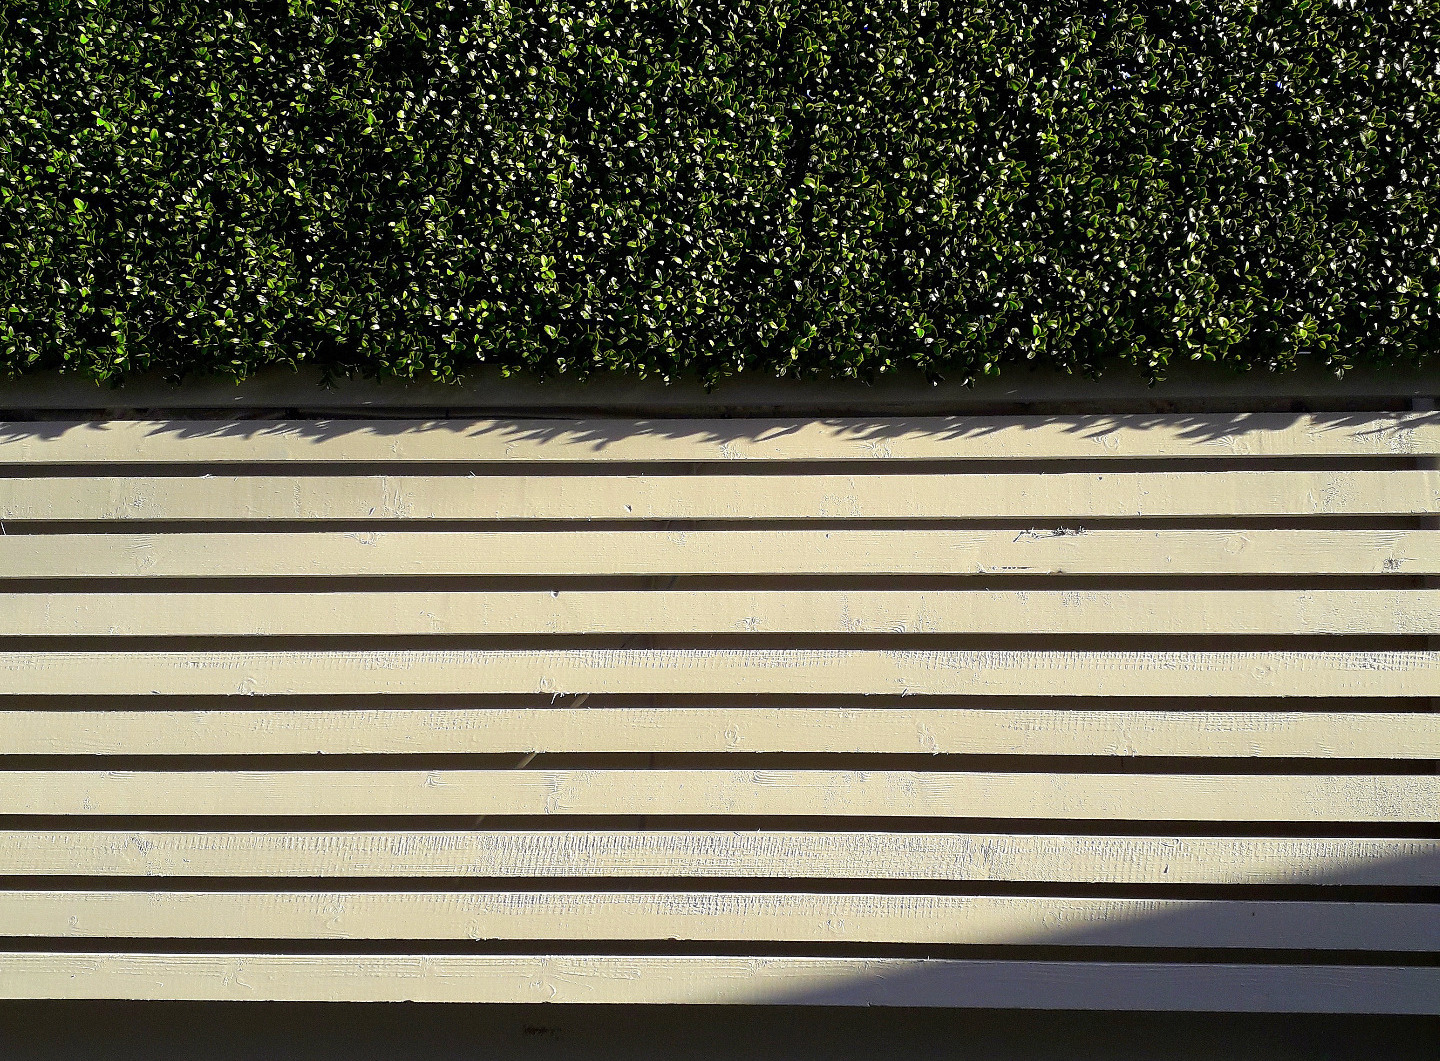 Perfect combo: Synthetic Boxwood Cladding & custom made timber slatted fencing screen | Ranelagh, Dublin 6